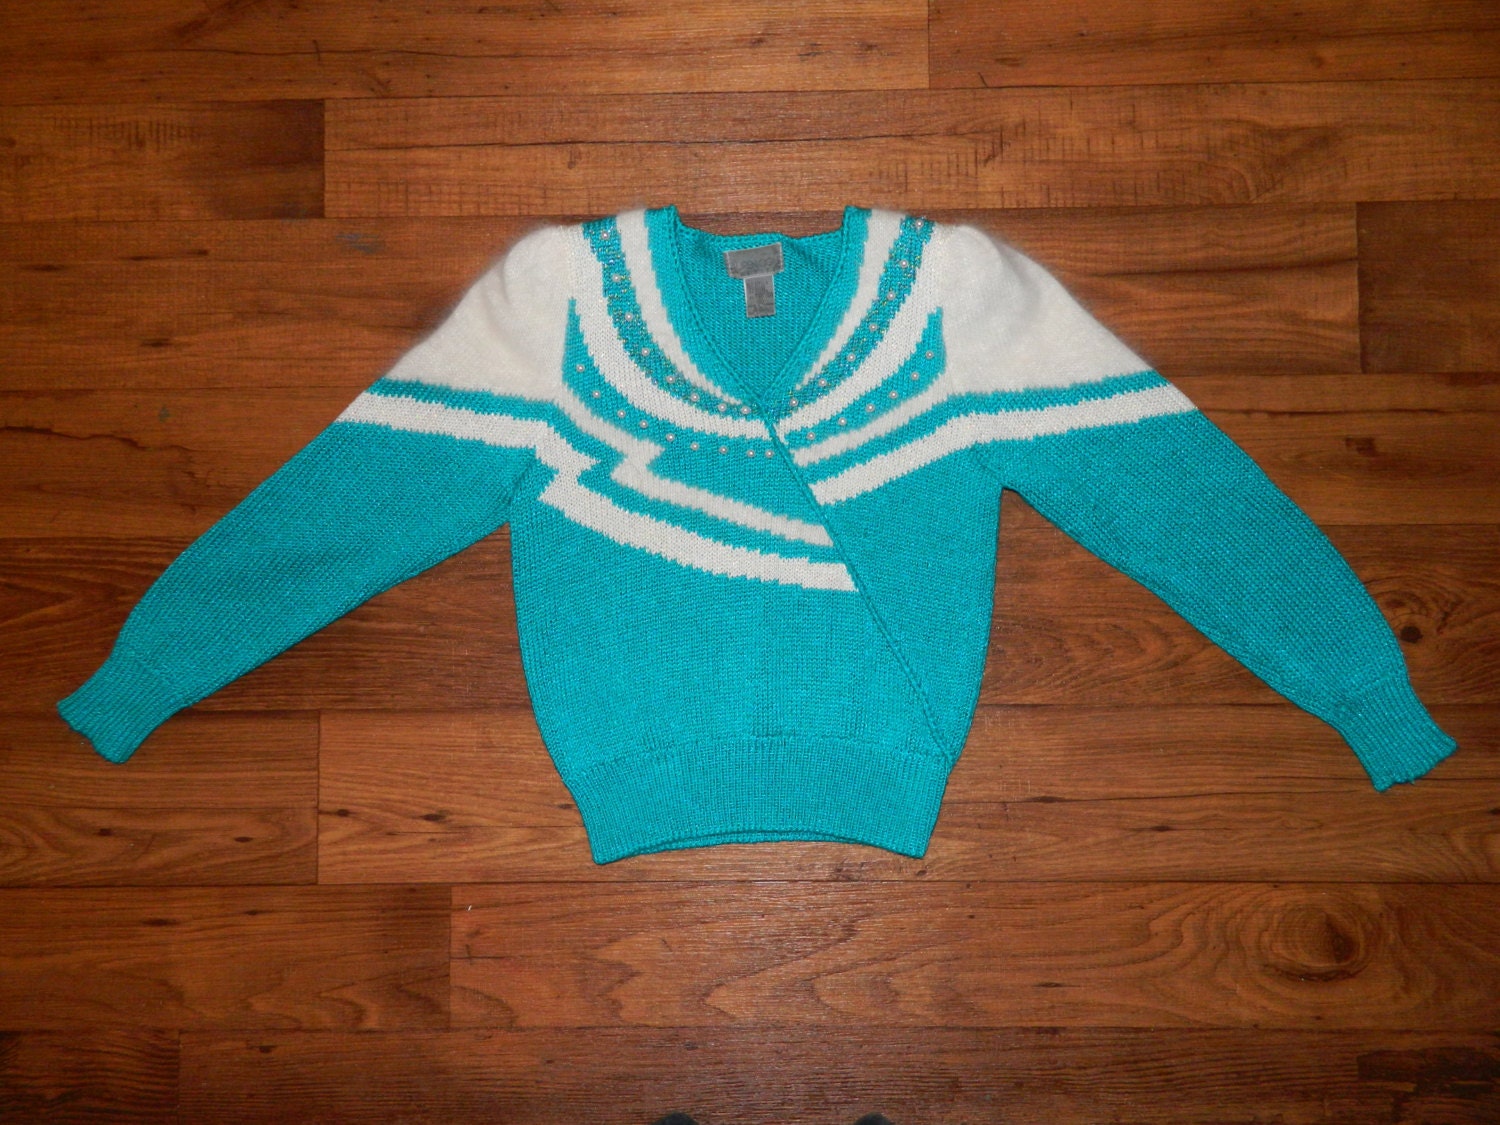 Vintage Color Block Abstract Sweater. by ReallyDopeVintage on Etsy